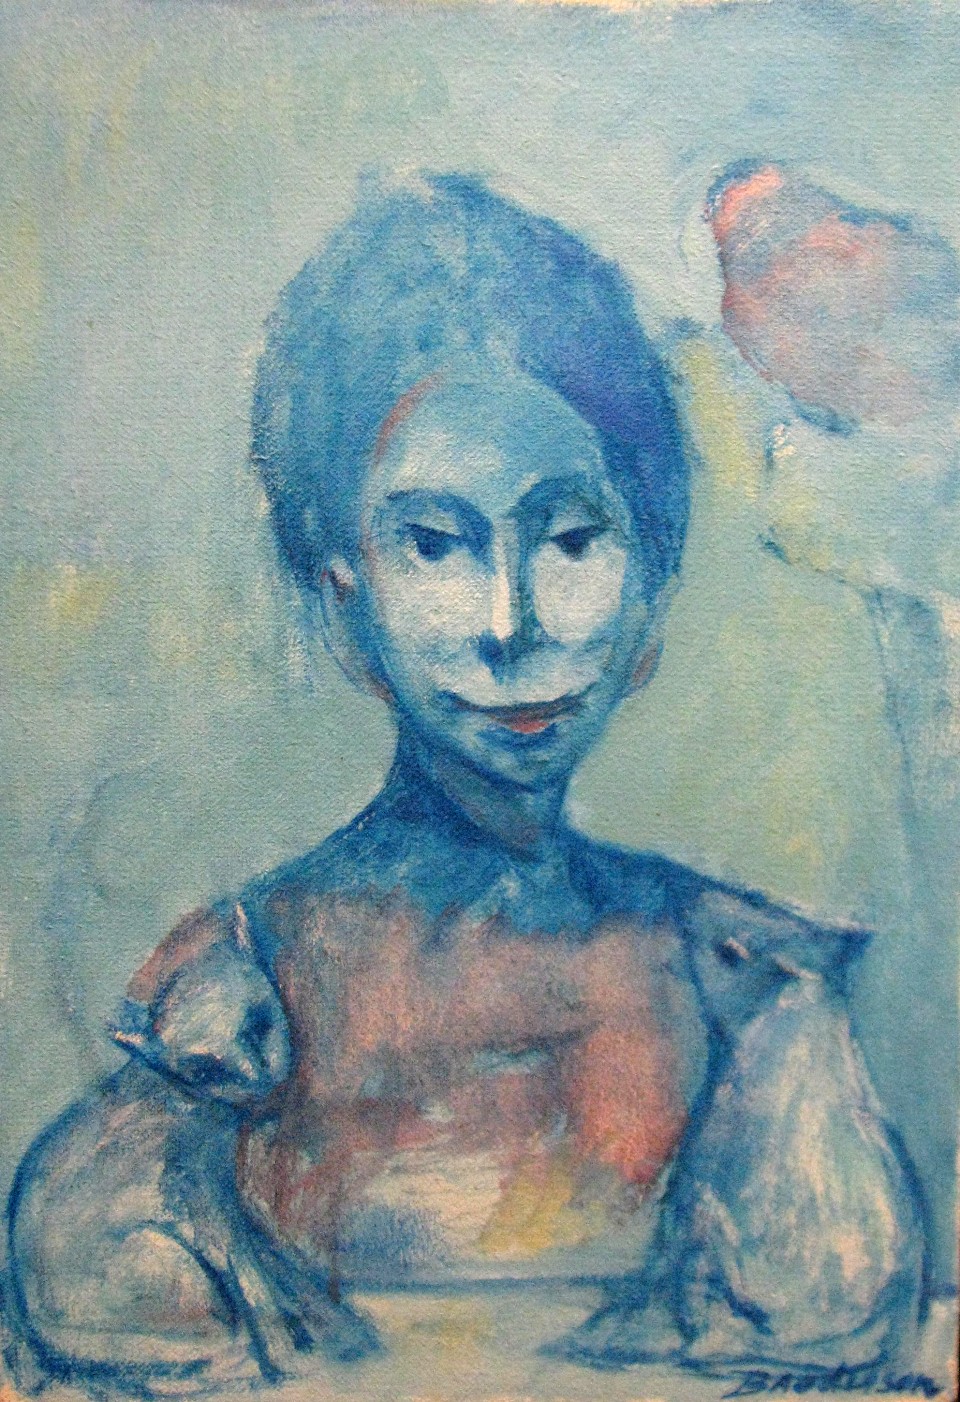 Robert Broderson, Lady with Creatures, Oil on Paper, 20 x 14